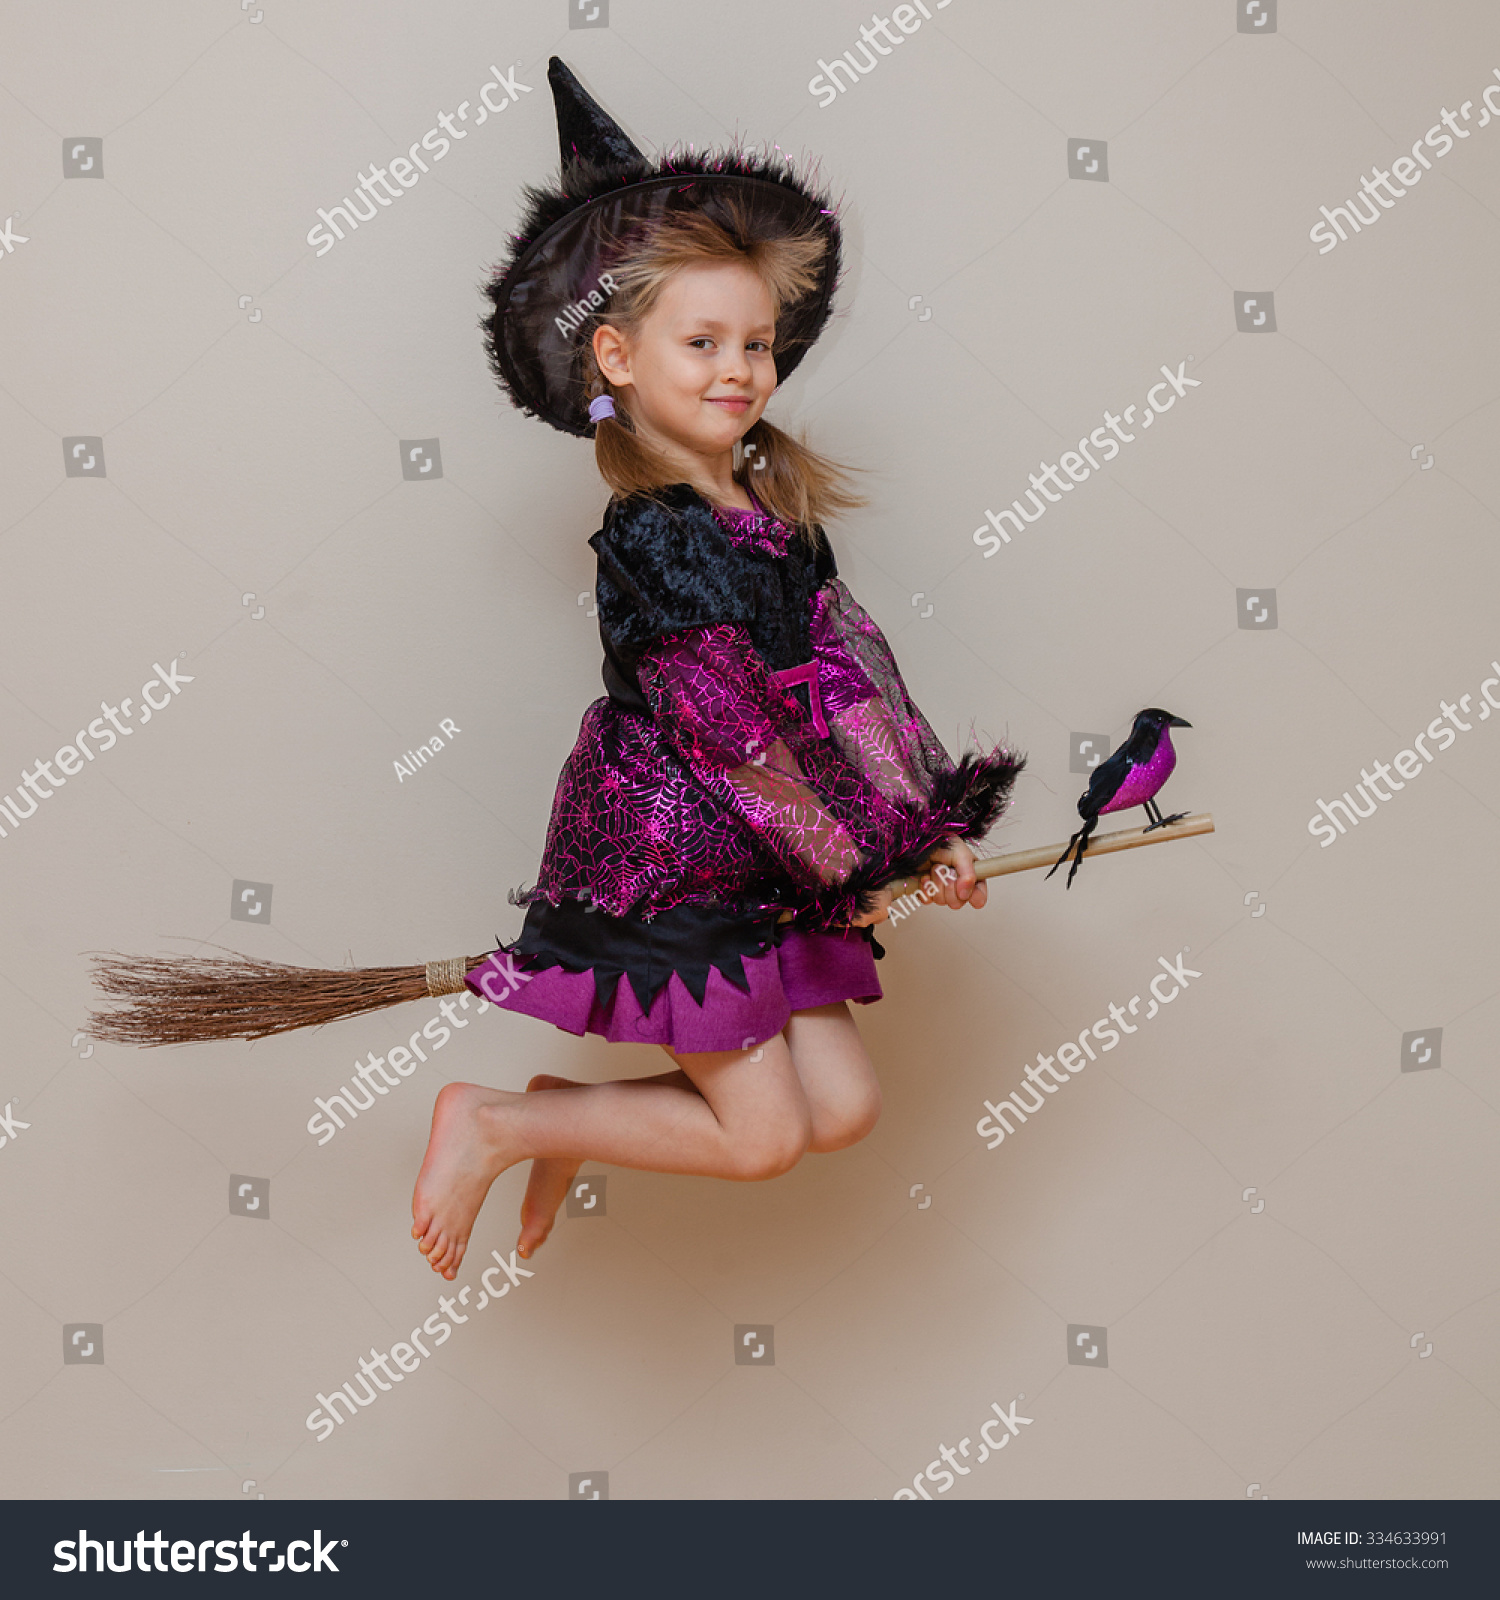 Pretty Little Girl Funny Tricky Face Stock Photo (Royalty Free ...